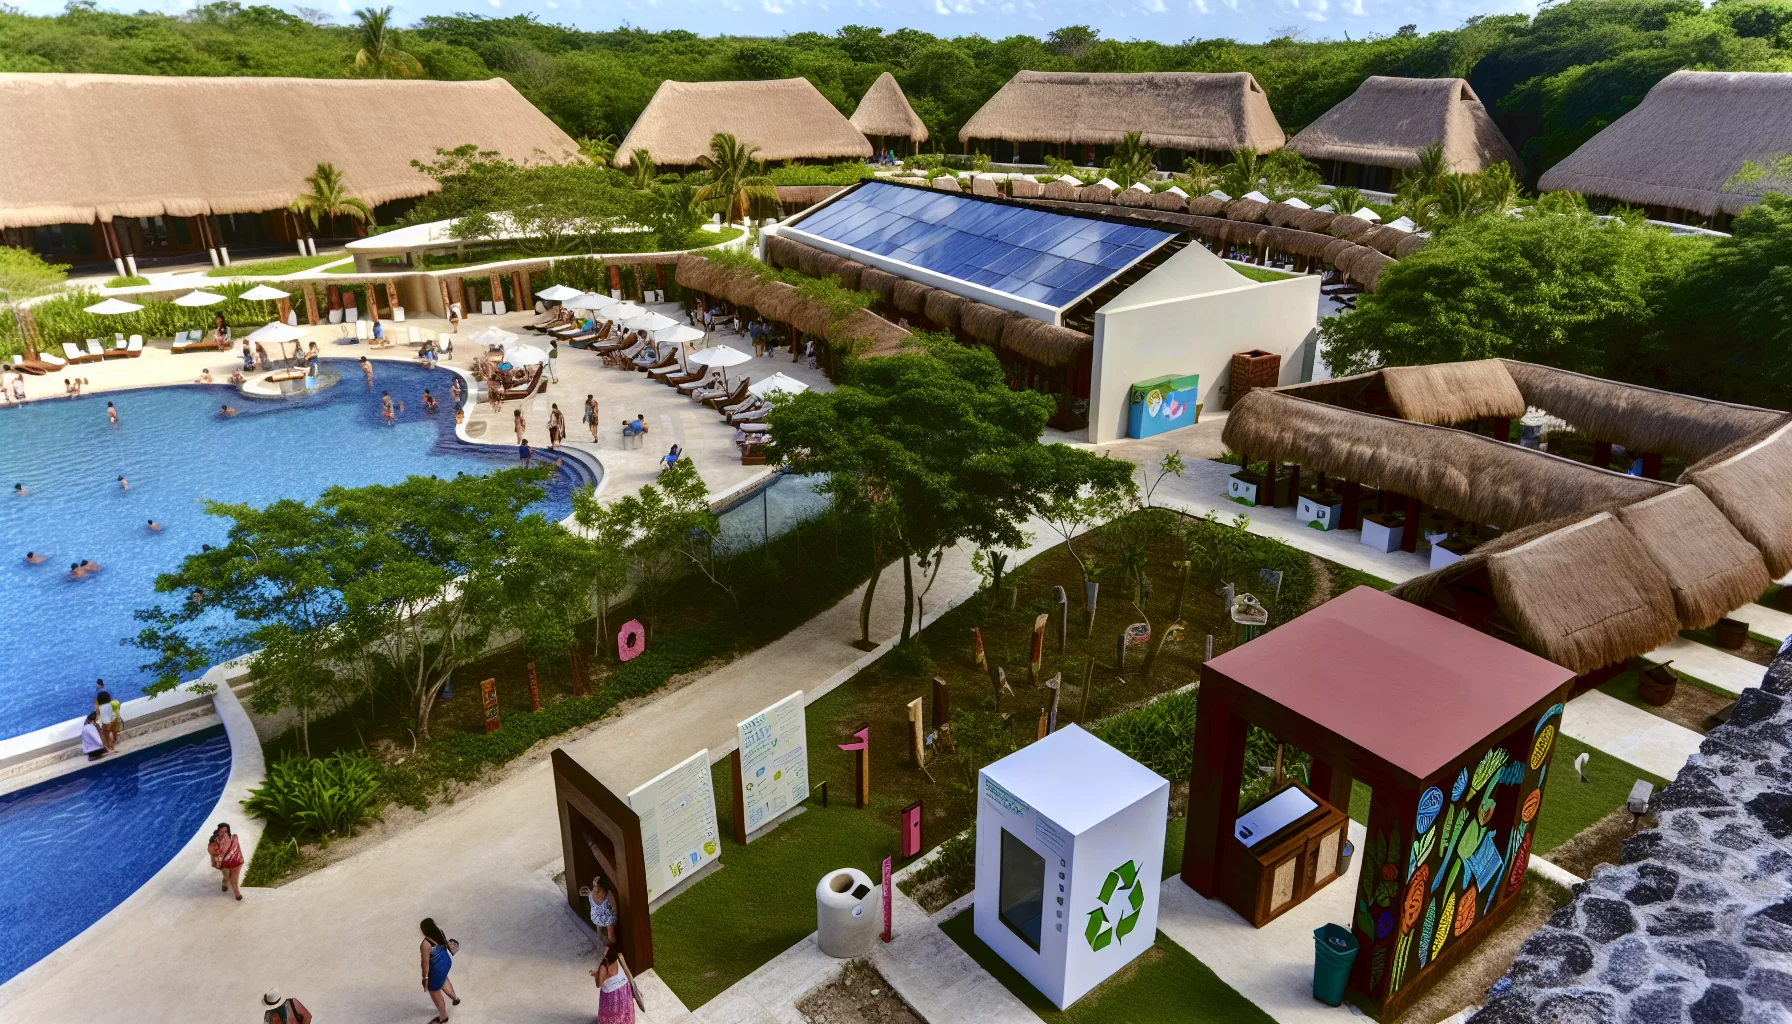 Marriott unveils exquisite adults-only resort in Riviera Maya, pledges sustainability and cultural immersion